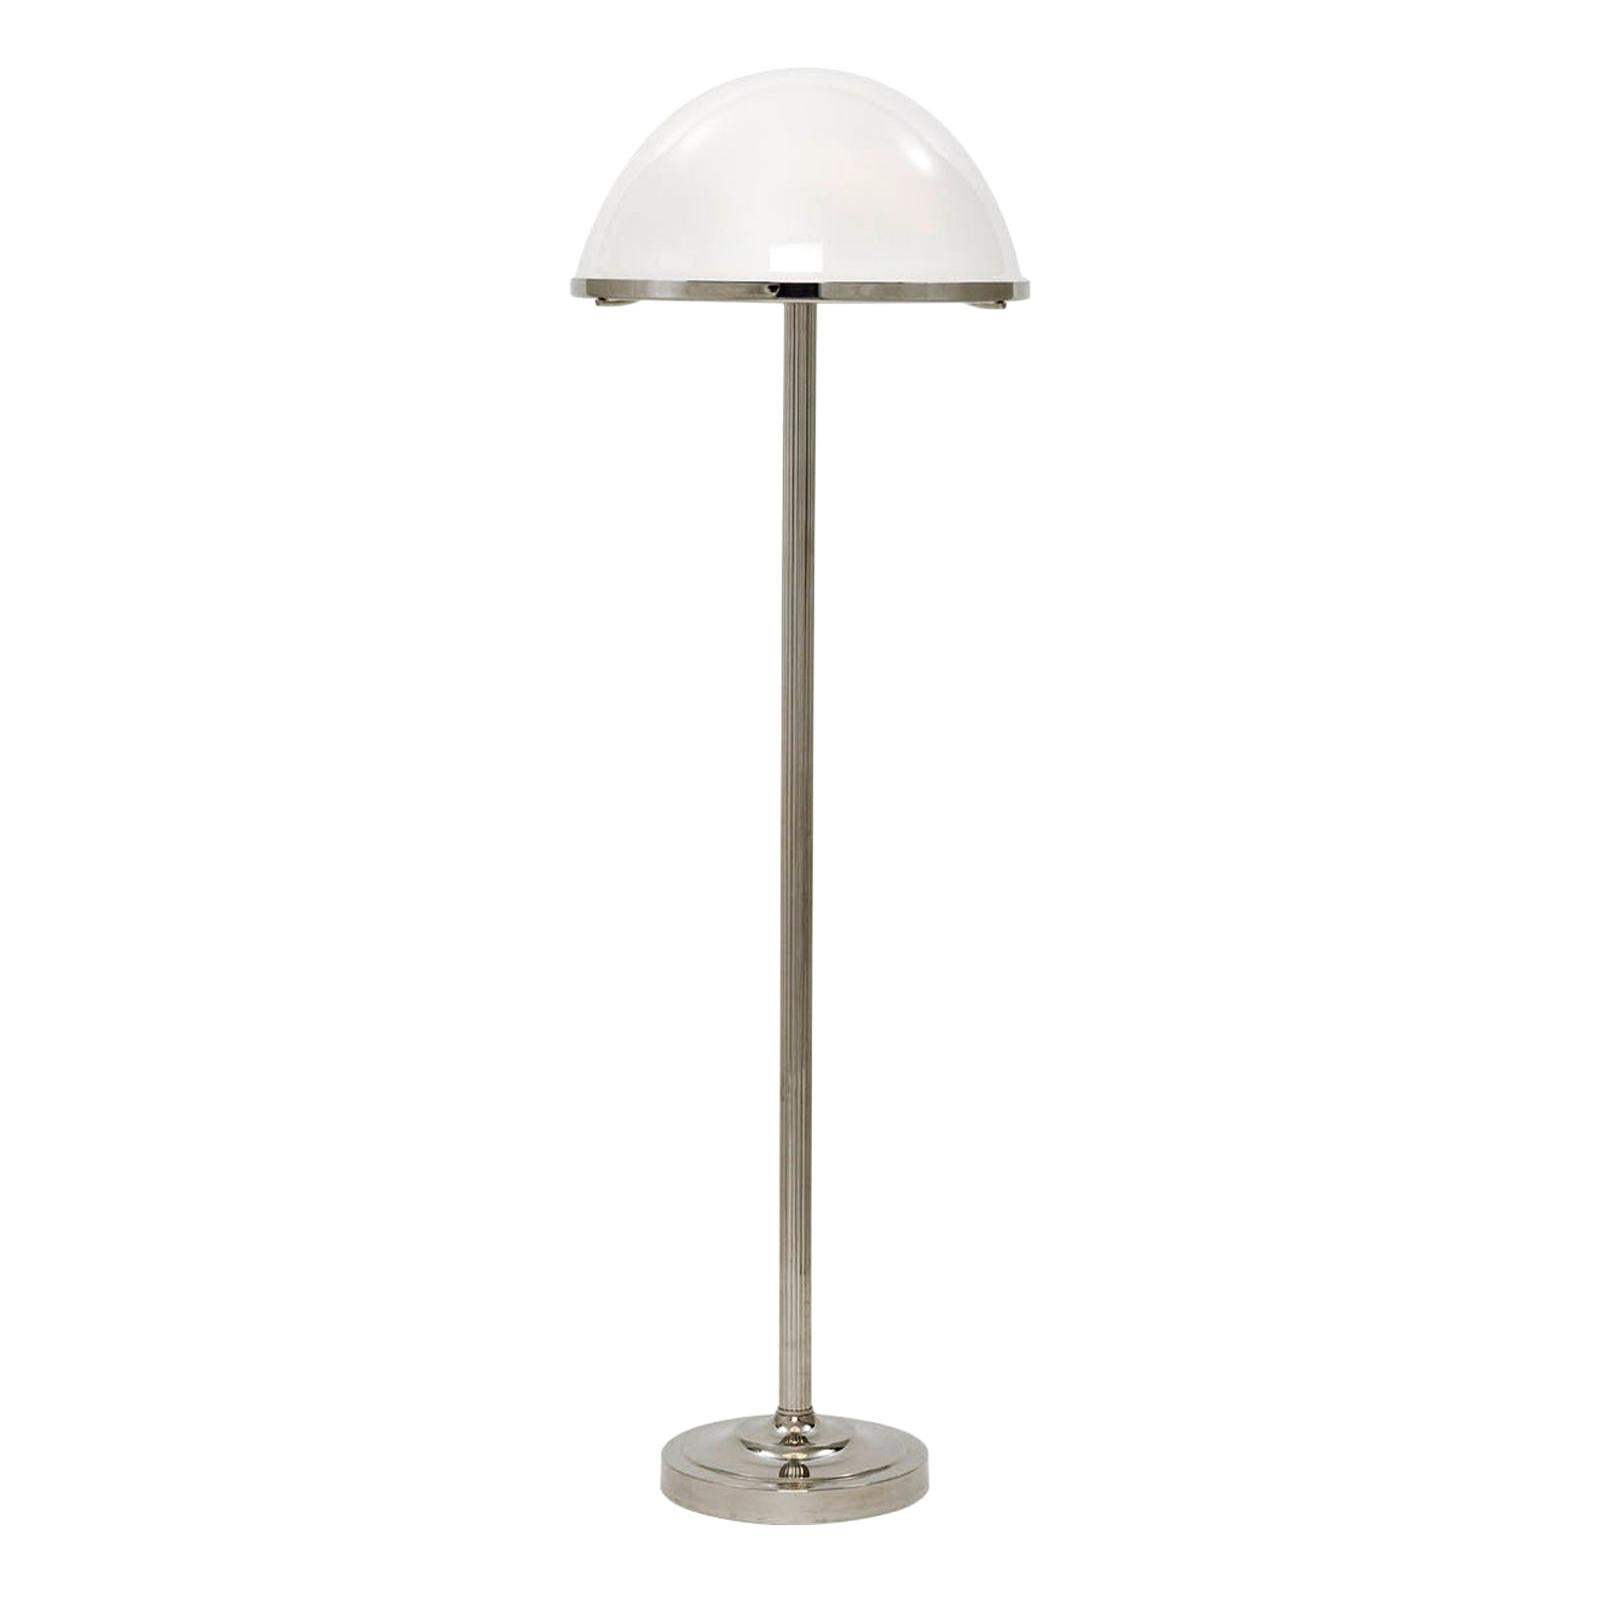 Floor-lamp with opaline glass shade, designed for Villa Steiner, a famous house by Adolf Loos

Most components according to the UL regulations, with an additional charge we will UL-list and label our fixtures.
 